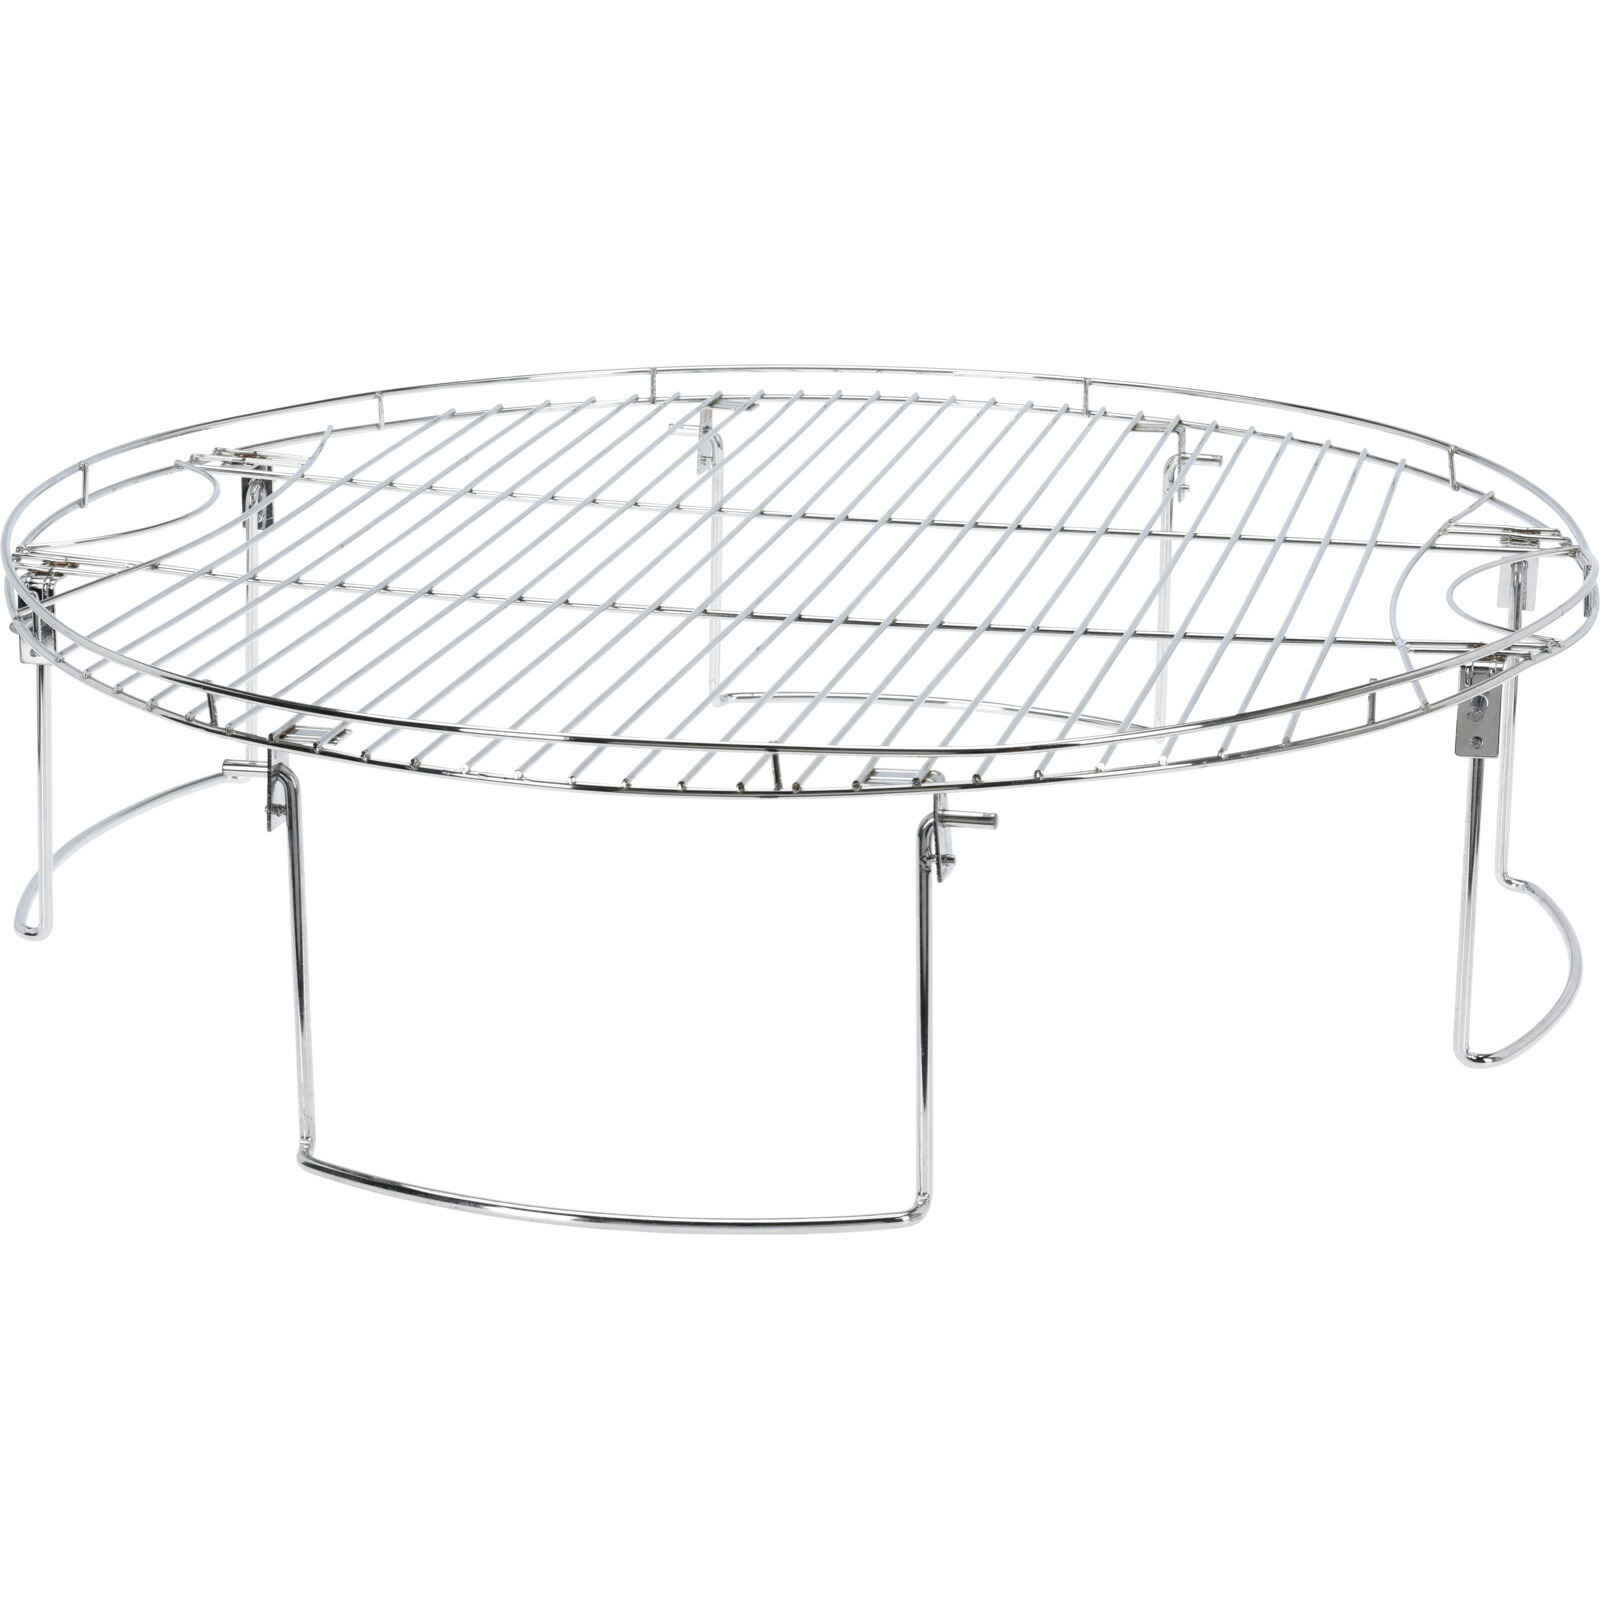 BBQ-barbecue rooster grill rond opzet verhoger metaal Dia 65 x H17 cm